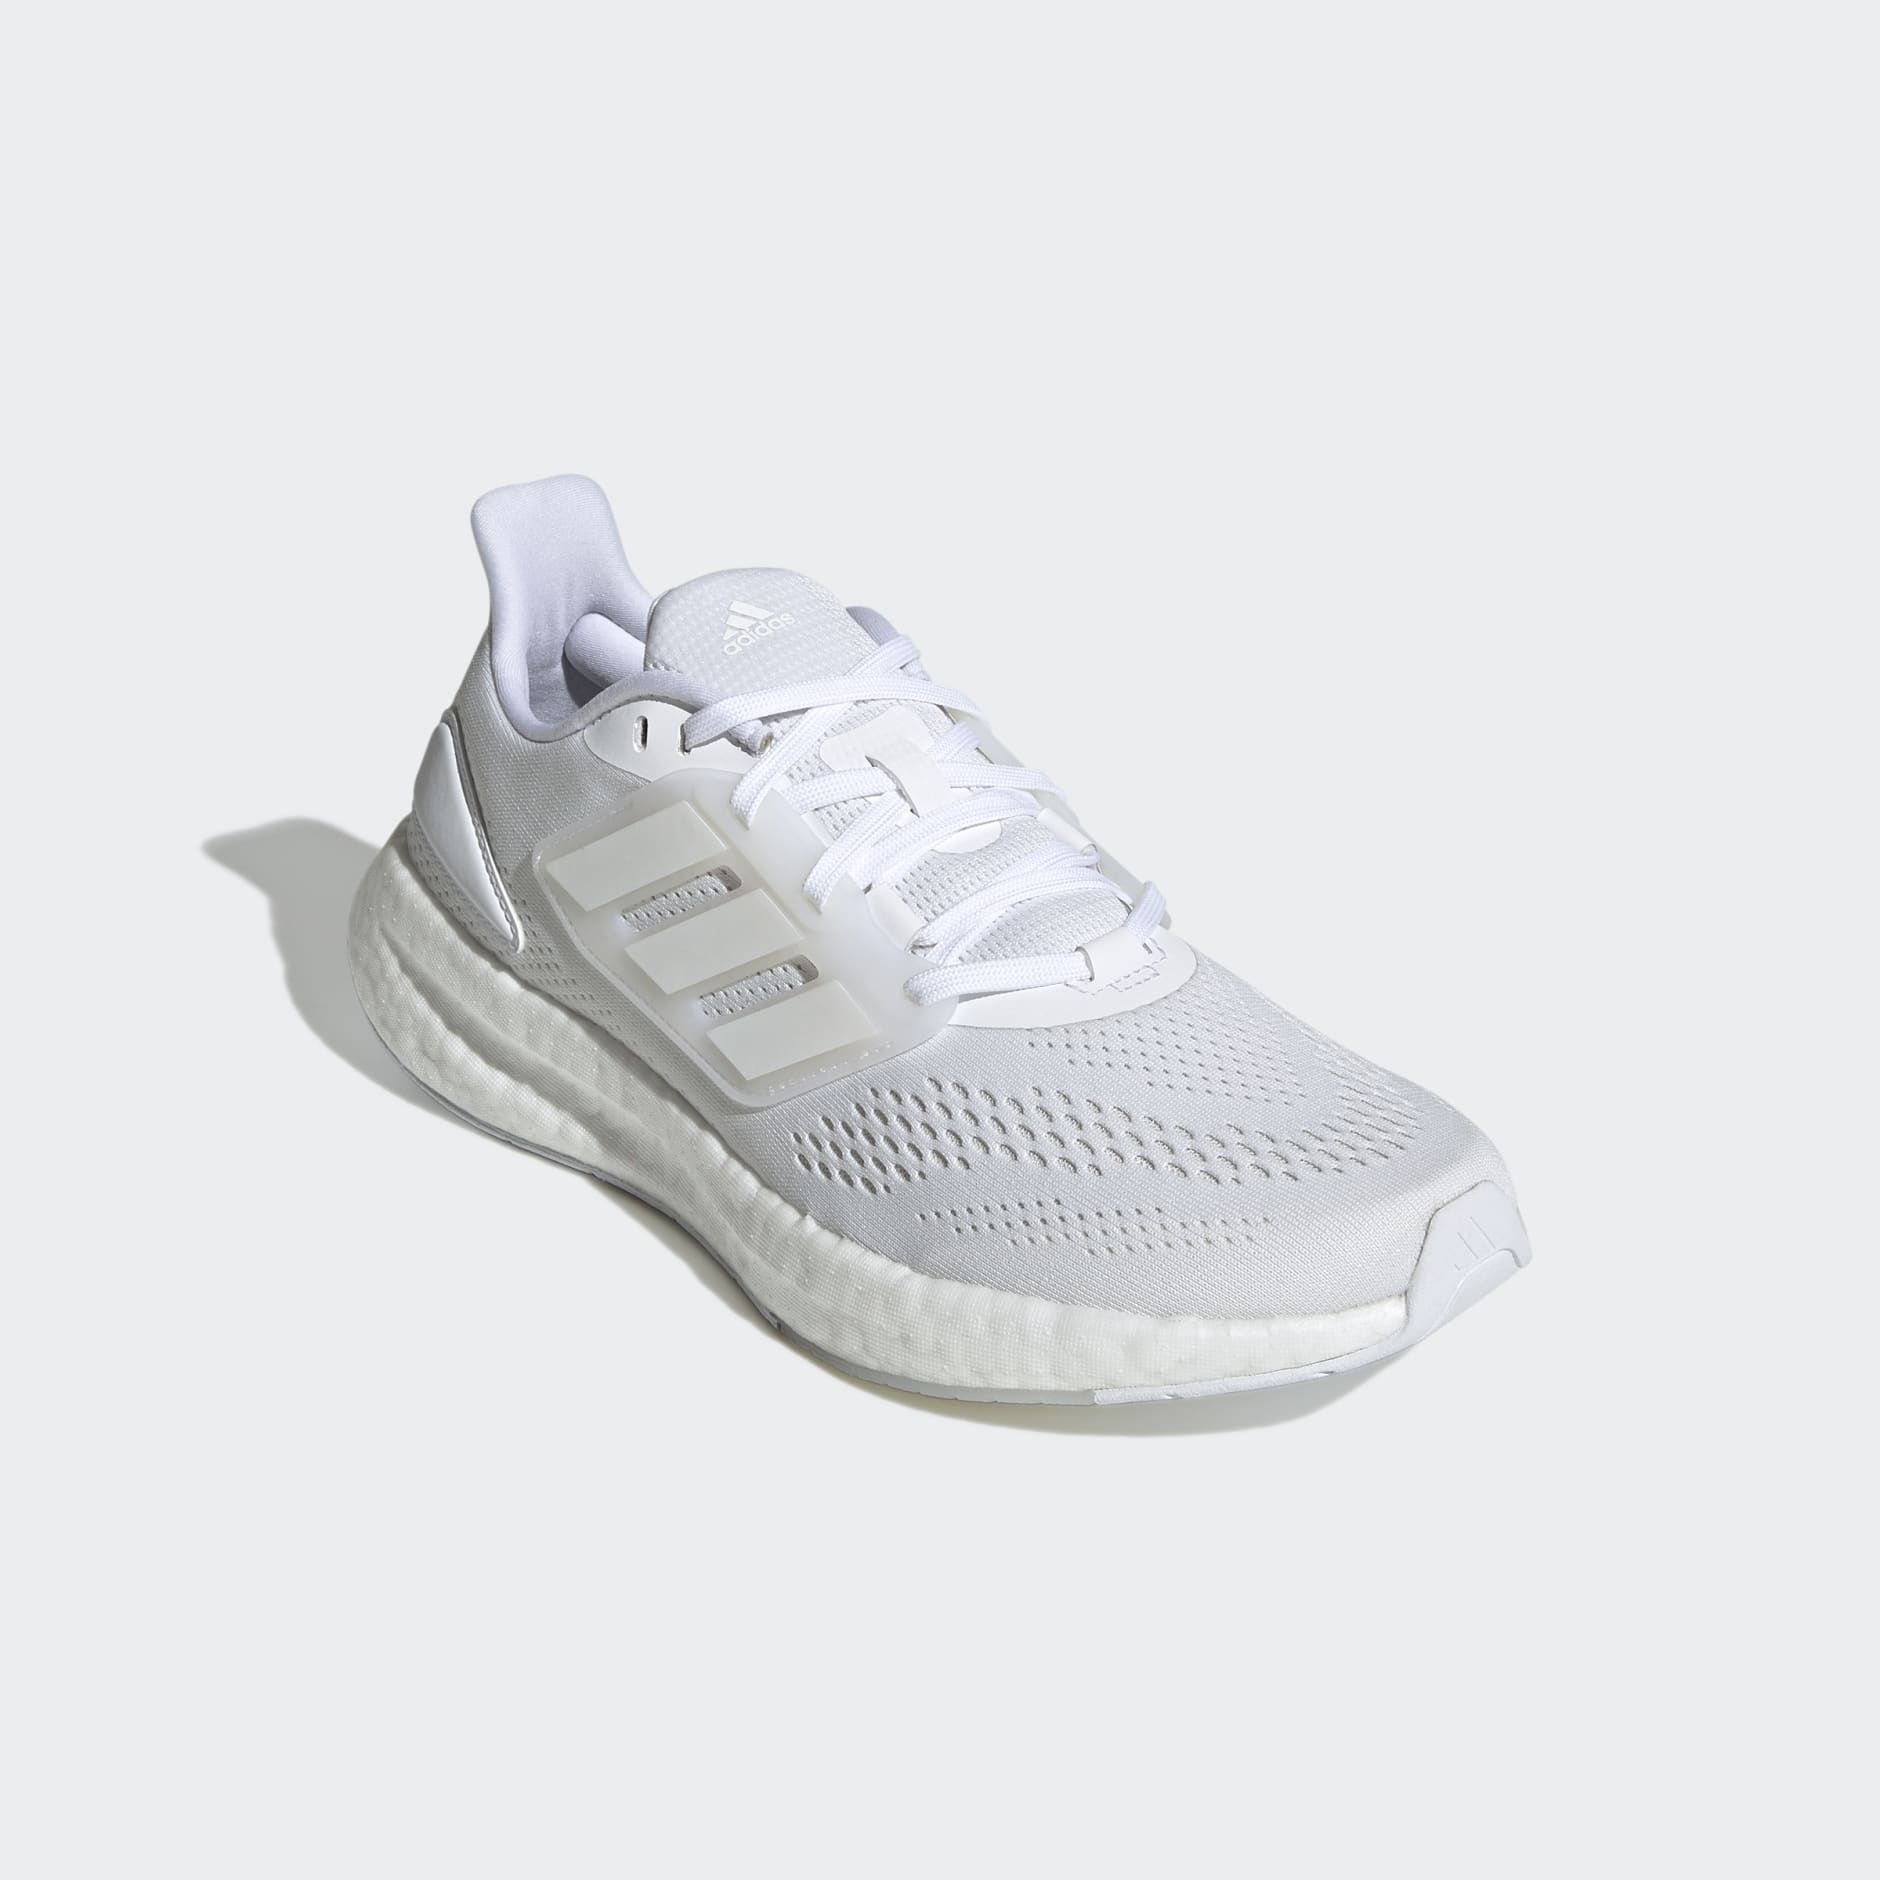 Shoes - Pureboost 22 Shoes - White | adidas South Africa